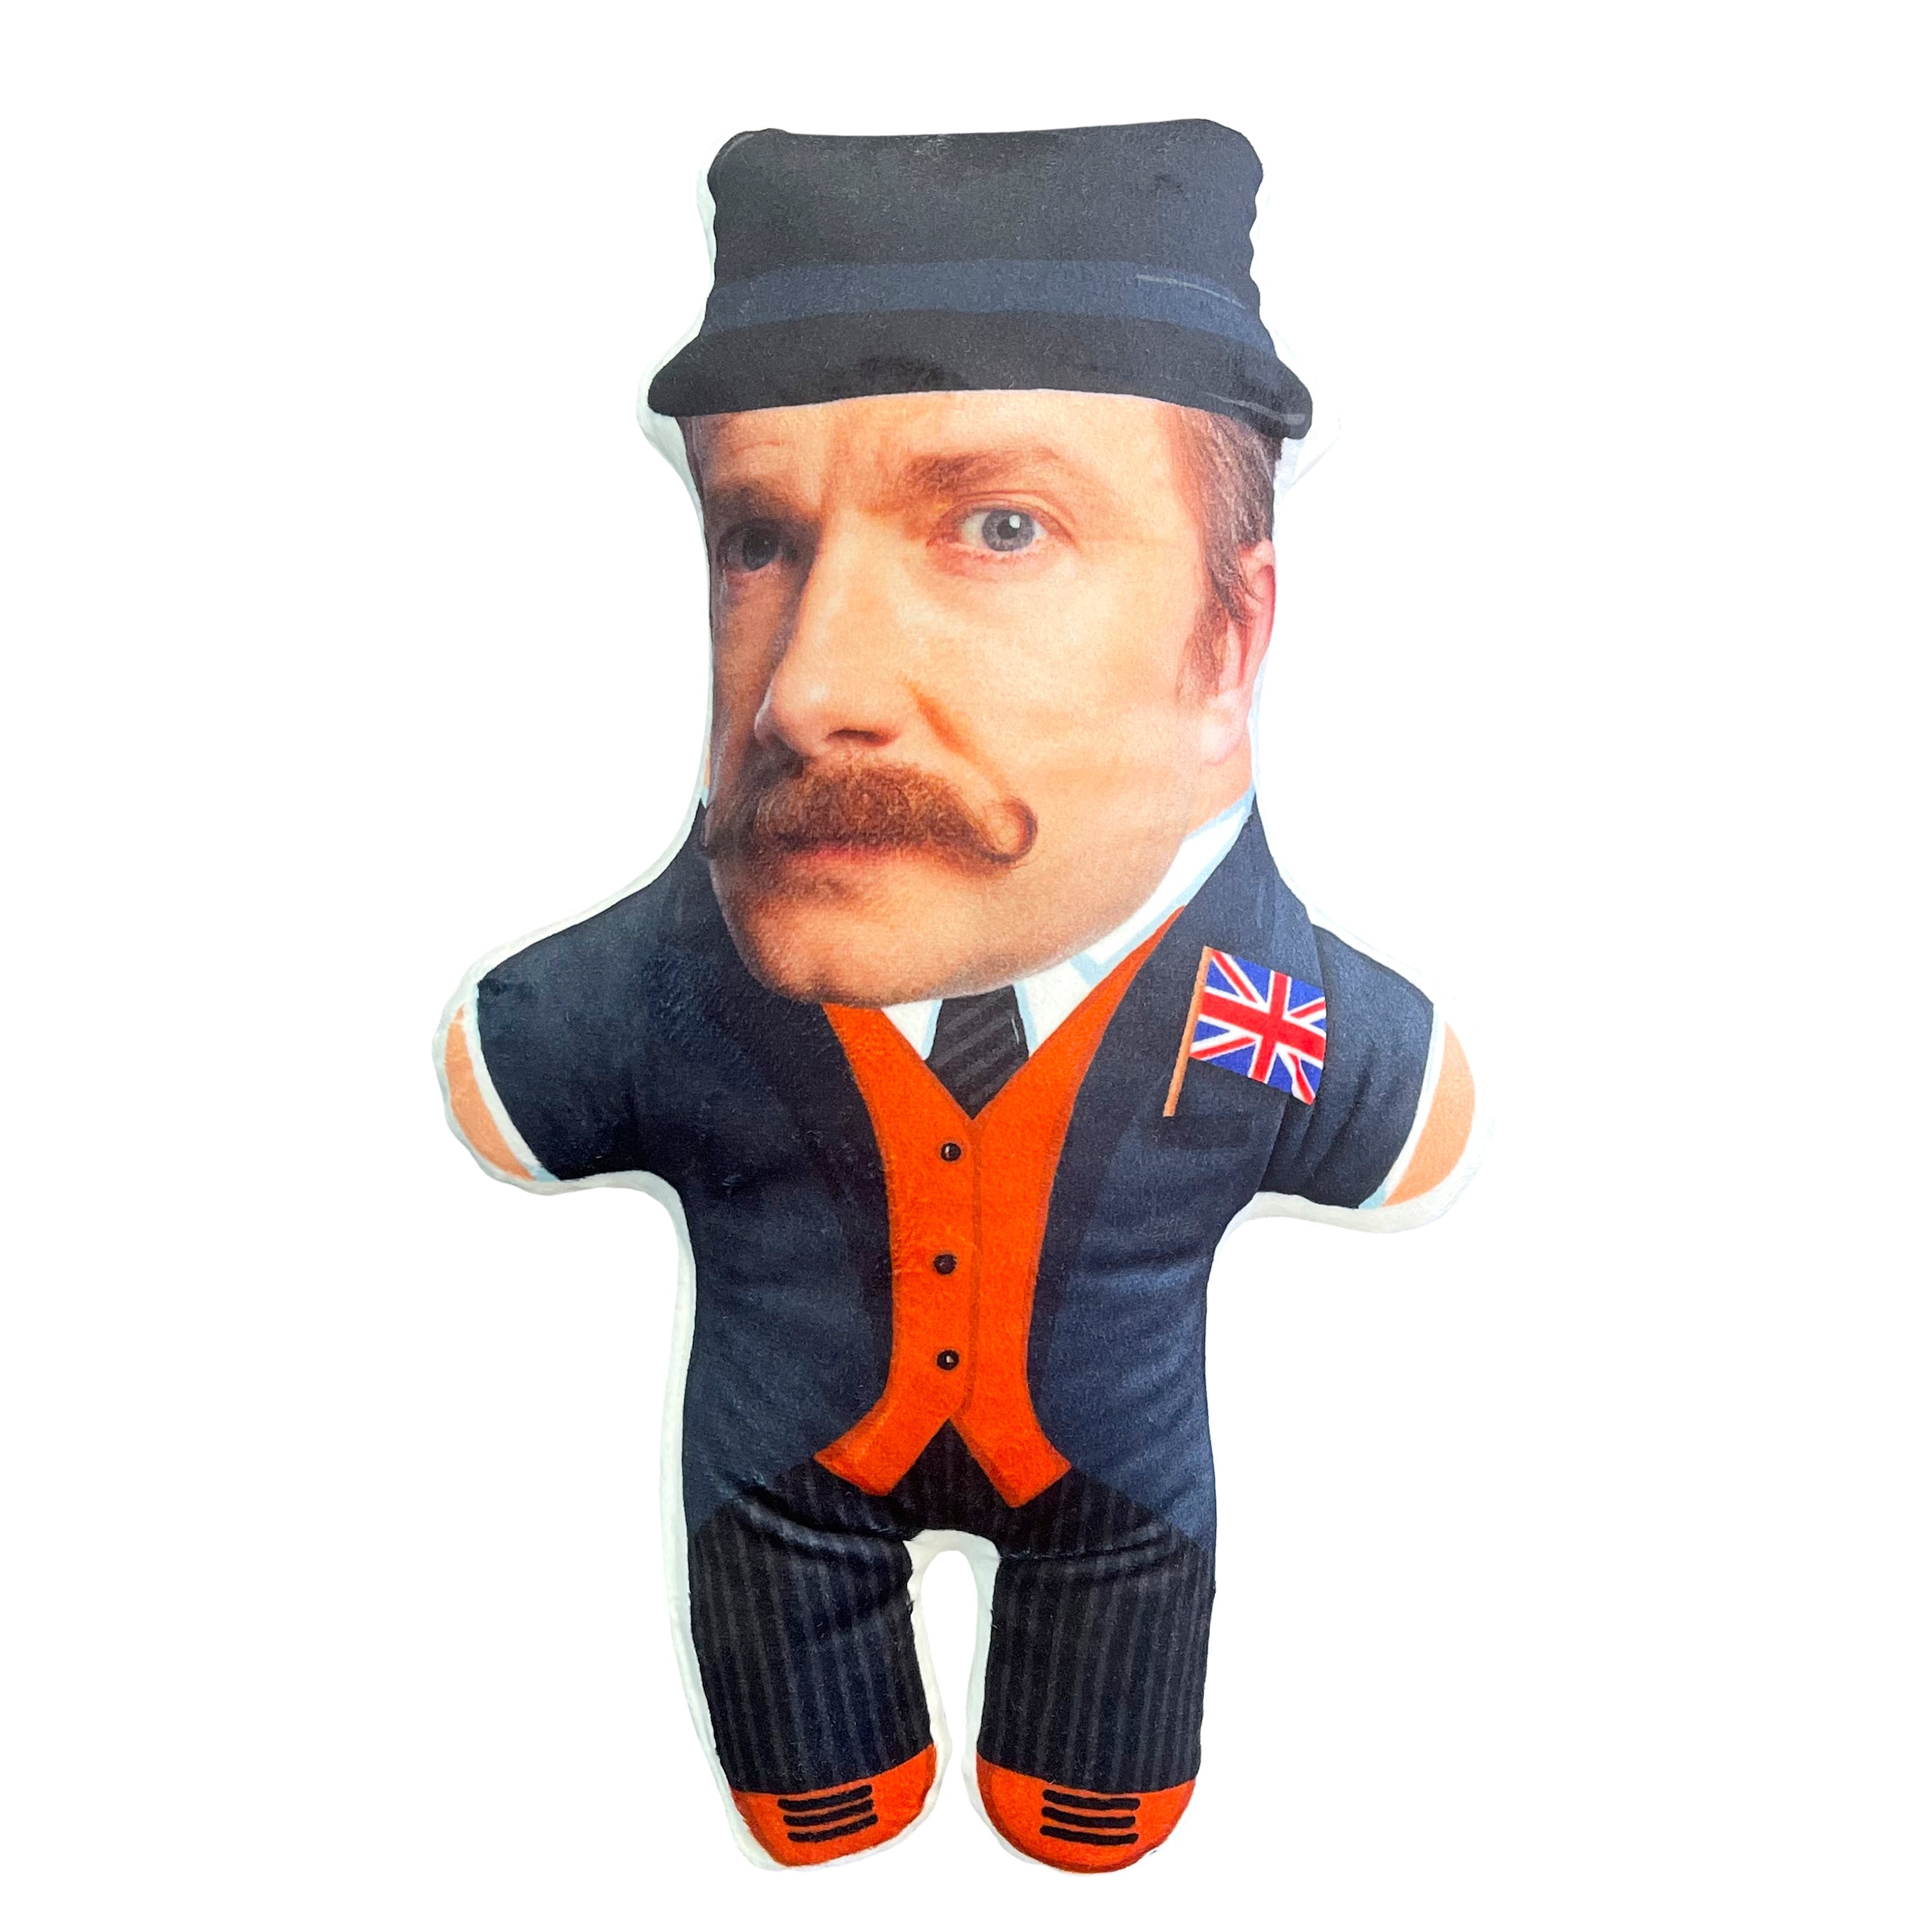 Gnome cushion with your photo "Mr. from England"